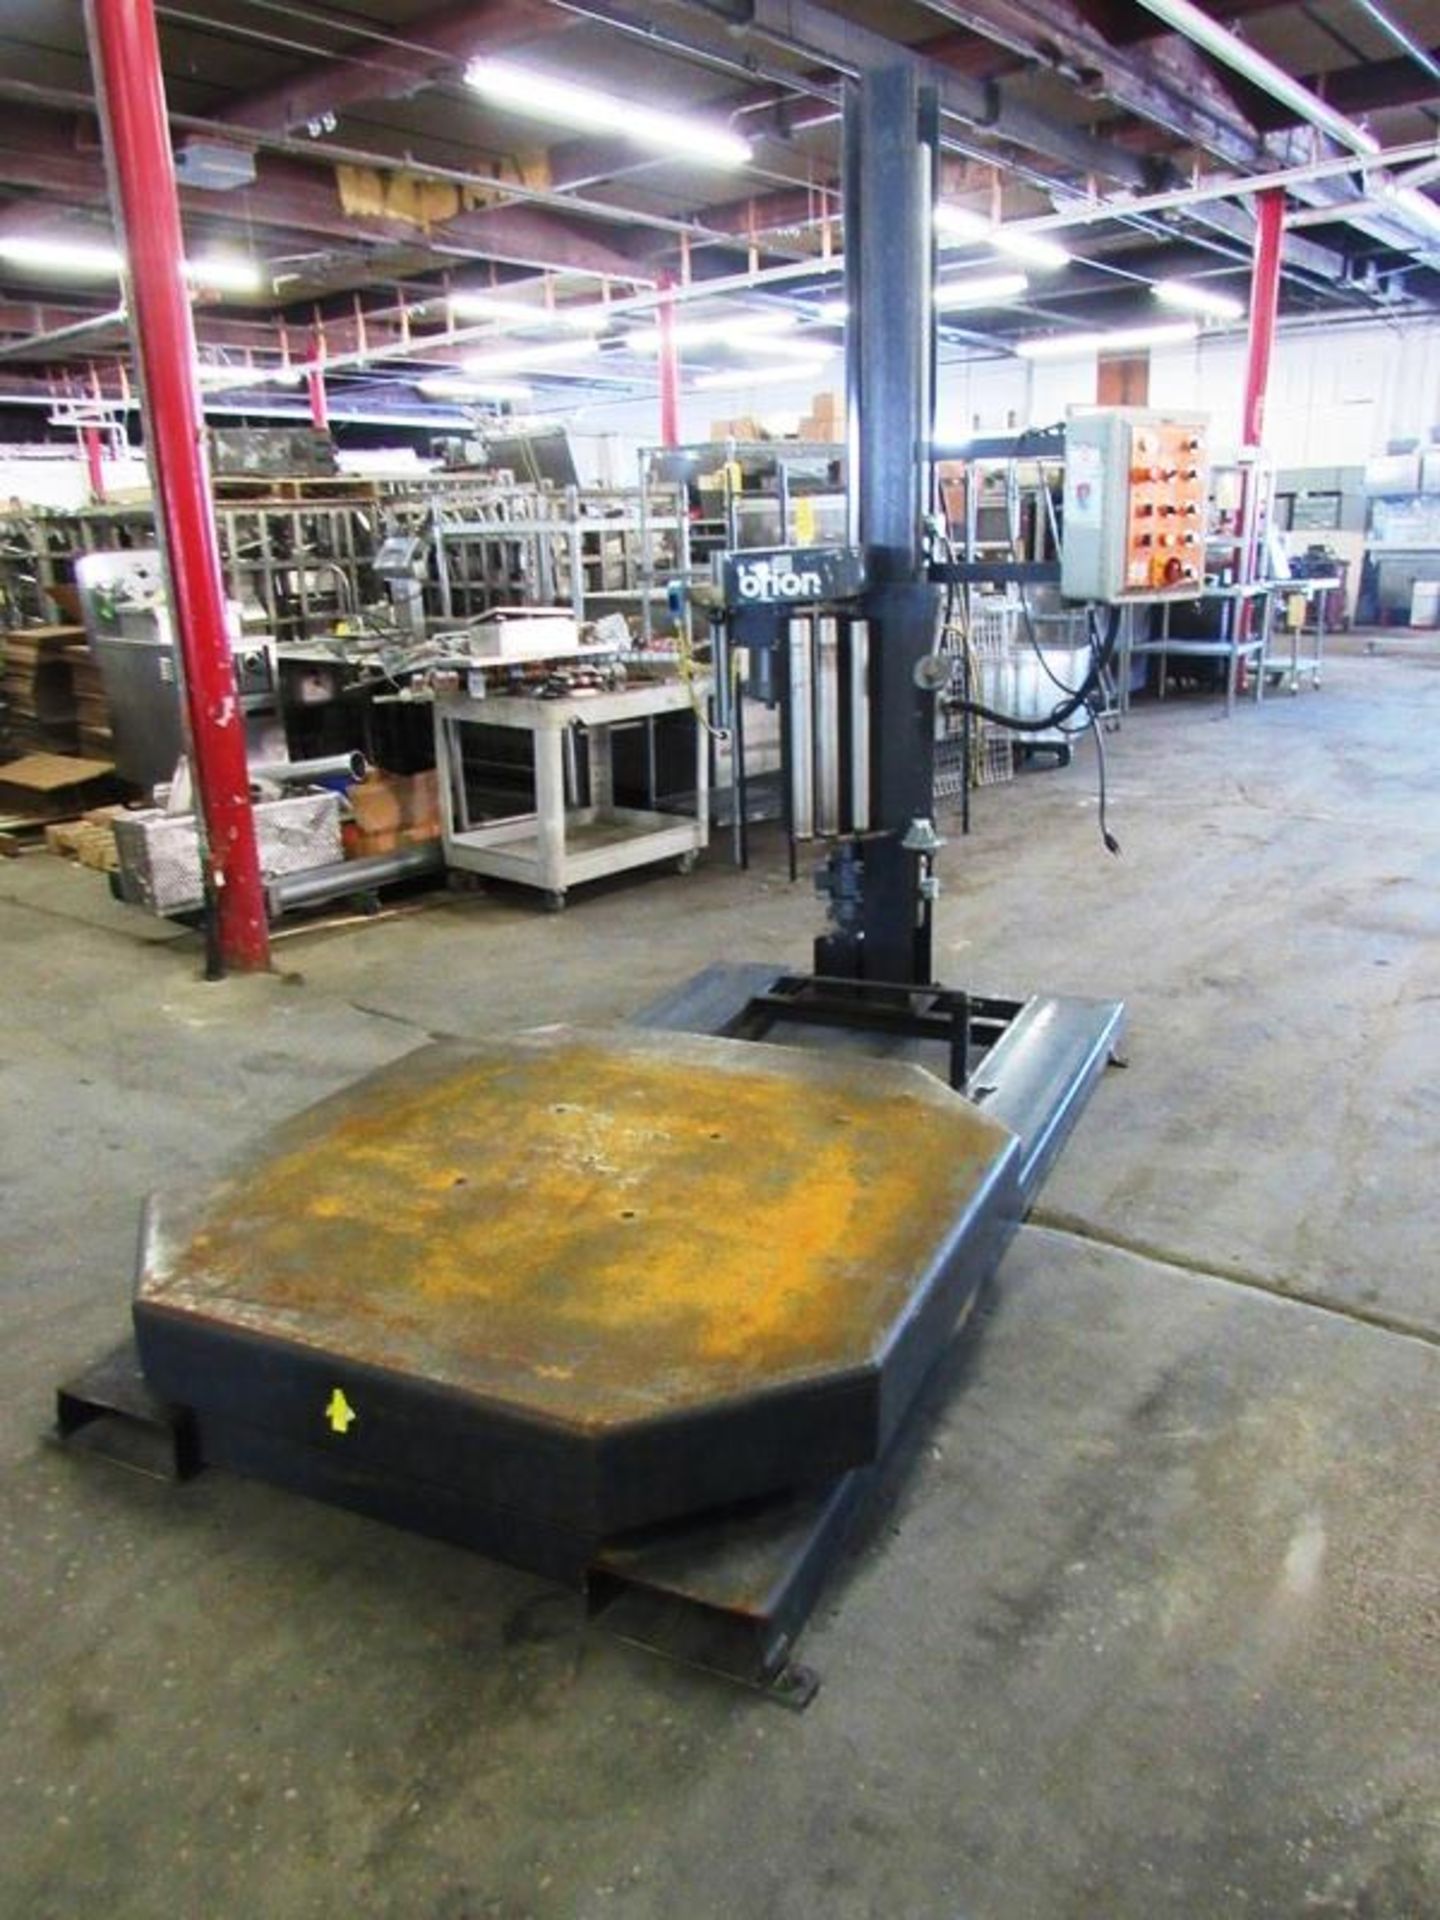 Orion Mdl. H55-9 Semi-Automatic Turn Table Pallet Wrapper, adjustable height to @65", adjustable